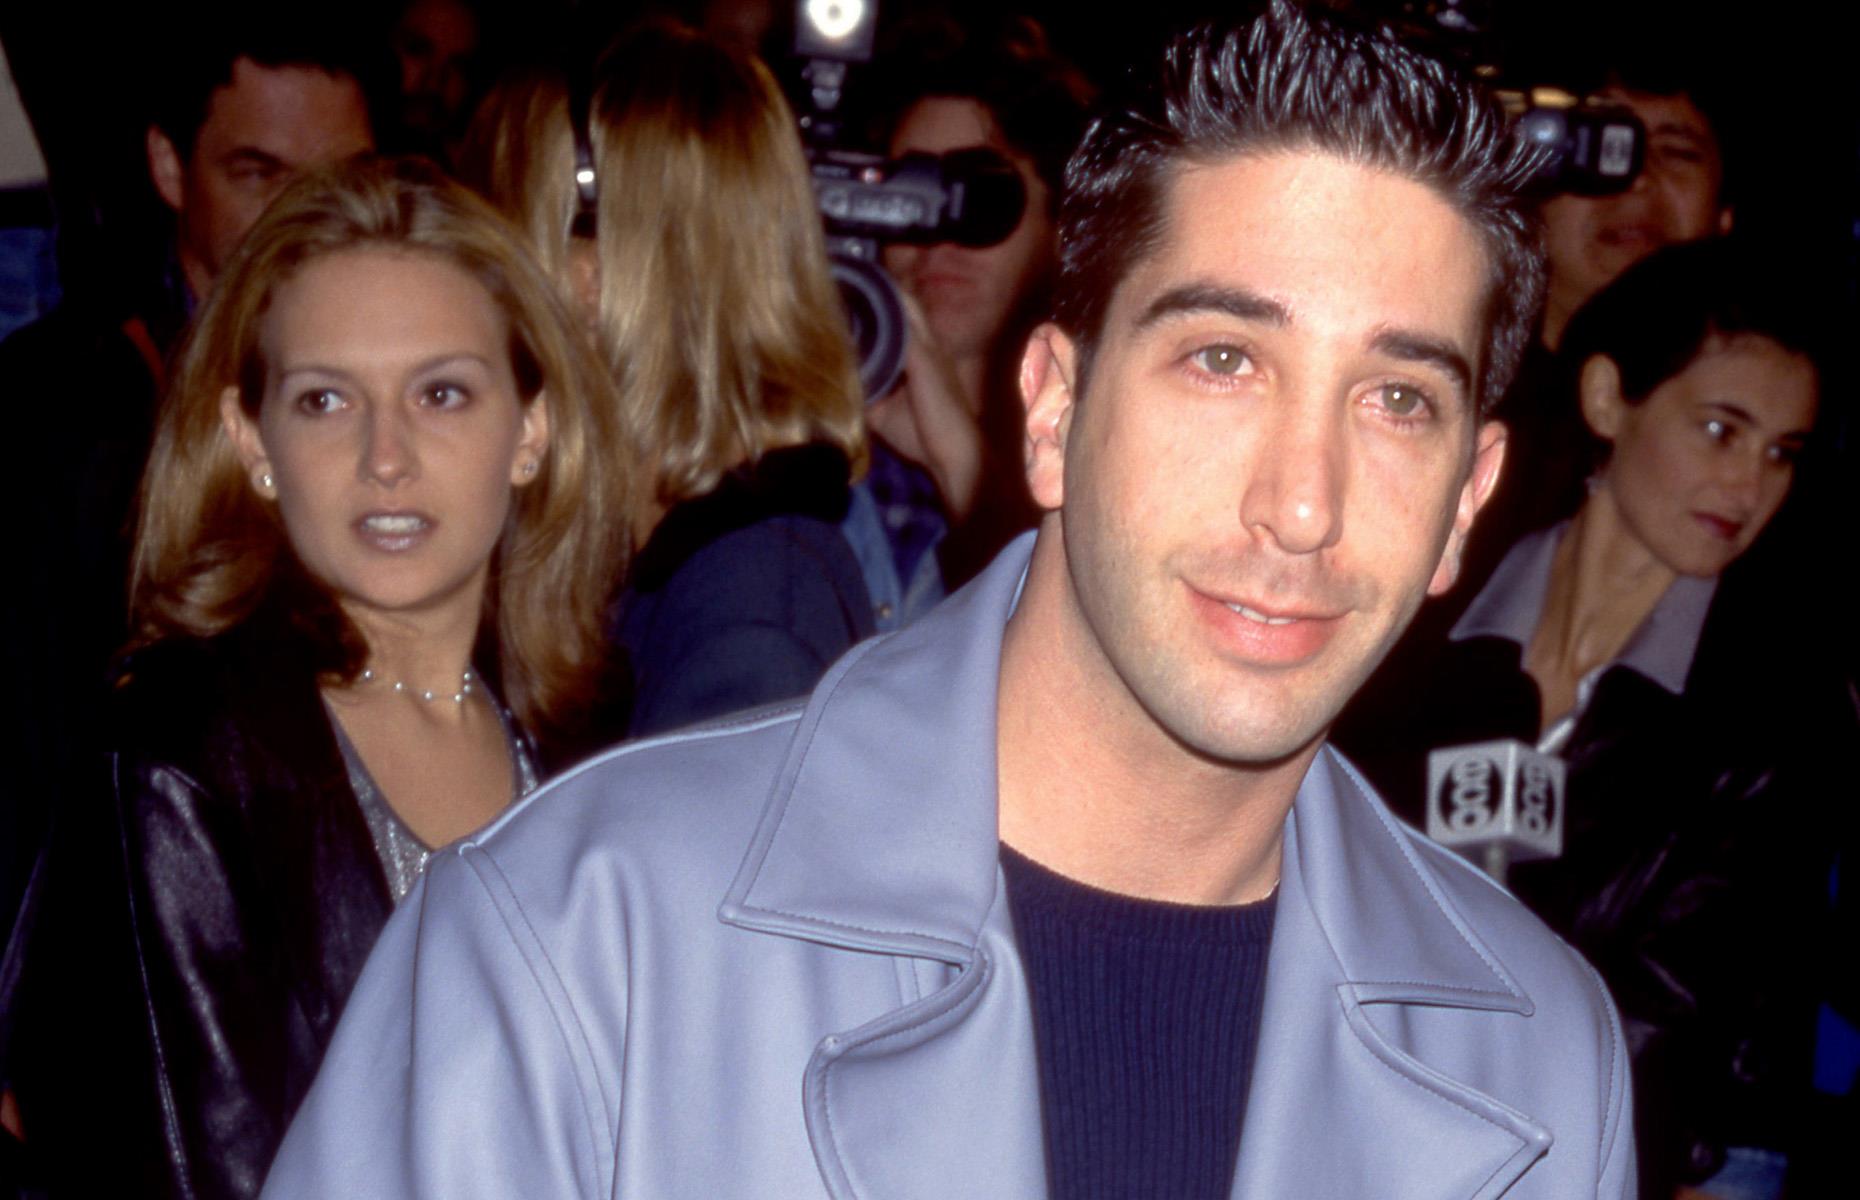 <p>David Schwimmer initially shied away from the glitz and glamour of Hollywood, and aside from appearing as a voice actor in the <em>Madagascar</em> films, he largely disappeared from the public gaze. However, he made a successful leap into the world of directing, helming projects such as <em>Little Britain USA</em> and <em>Growing Up Fisher</em>.</p>  <p>In 2016, Schwimmer was back on TV screens as Rob Kardashian in the TV docu-series T<em>he People v. O.J. Simpson: American Crime Story</em>, and in 2018–2019, he starred in five episodes of <em>Will & Grace</em>.</p>  <p>Most recently, Schwimmer starred in the 2024 dramedy movie <em>Little Death.</em></p>